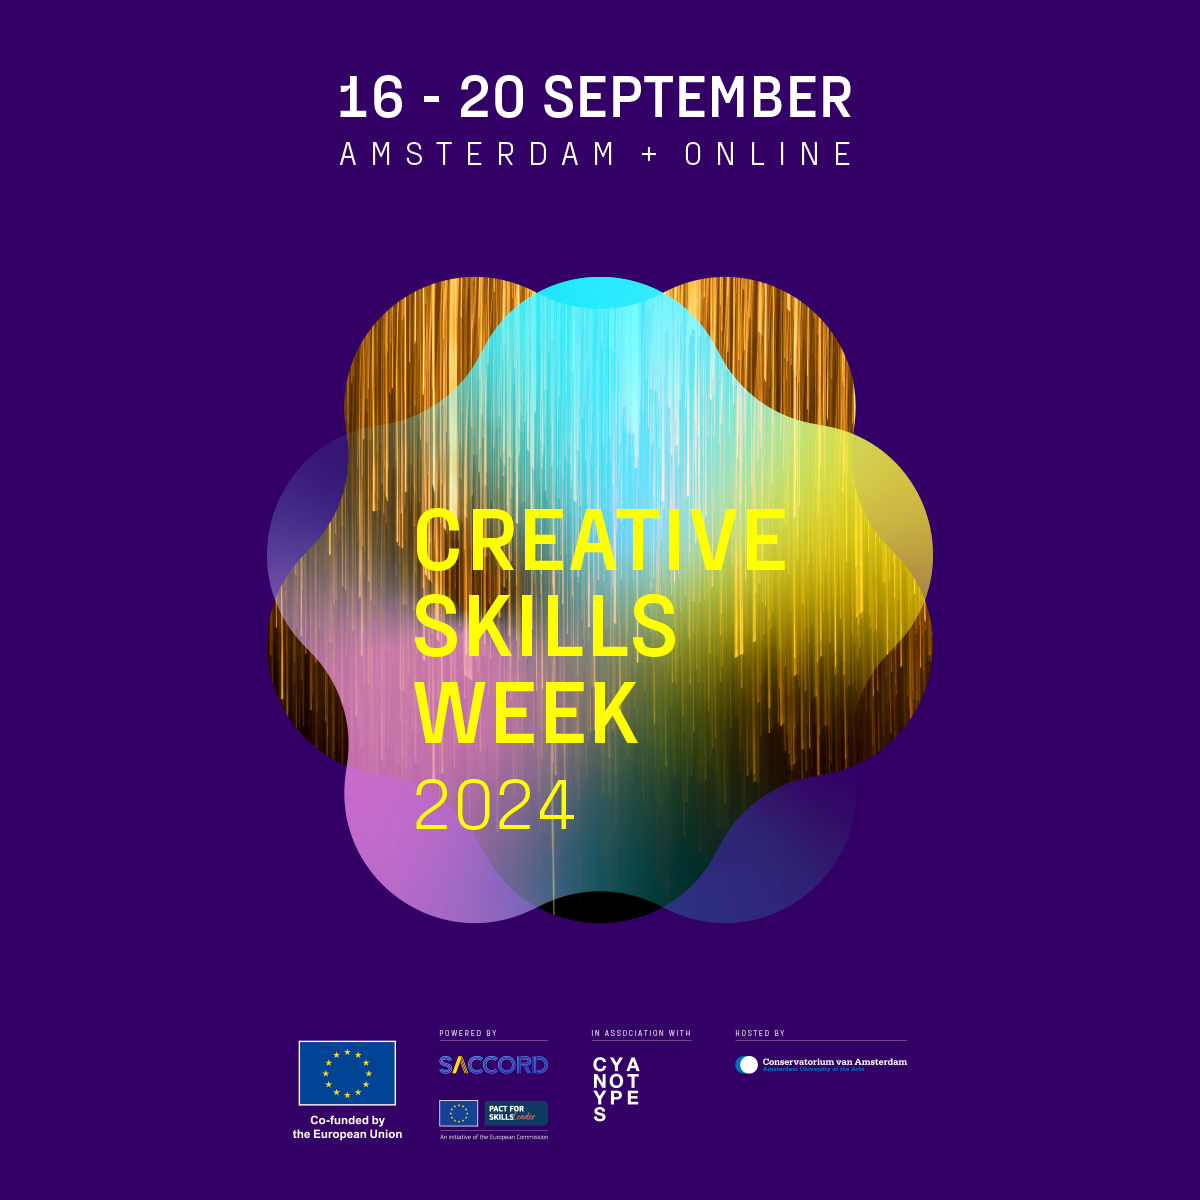 #CAEMembersNews #CreativeSkillsWeek 2024 Call is open - explore this opportunity for upskilling in the European Creative Skills Ecosystem Deadline extended until 25 May! Submit your proposal here 👉 ow.ly/3GFY50RvErZ